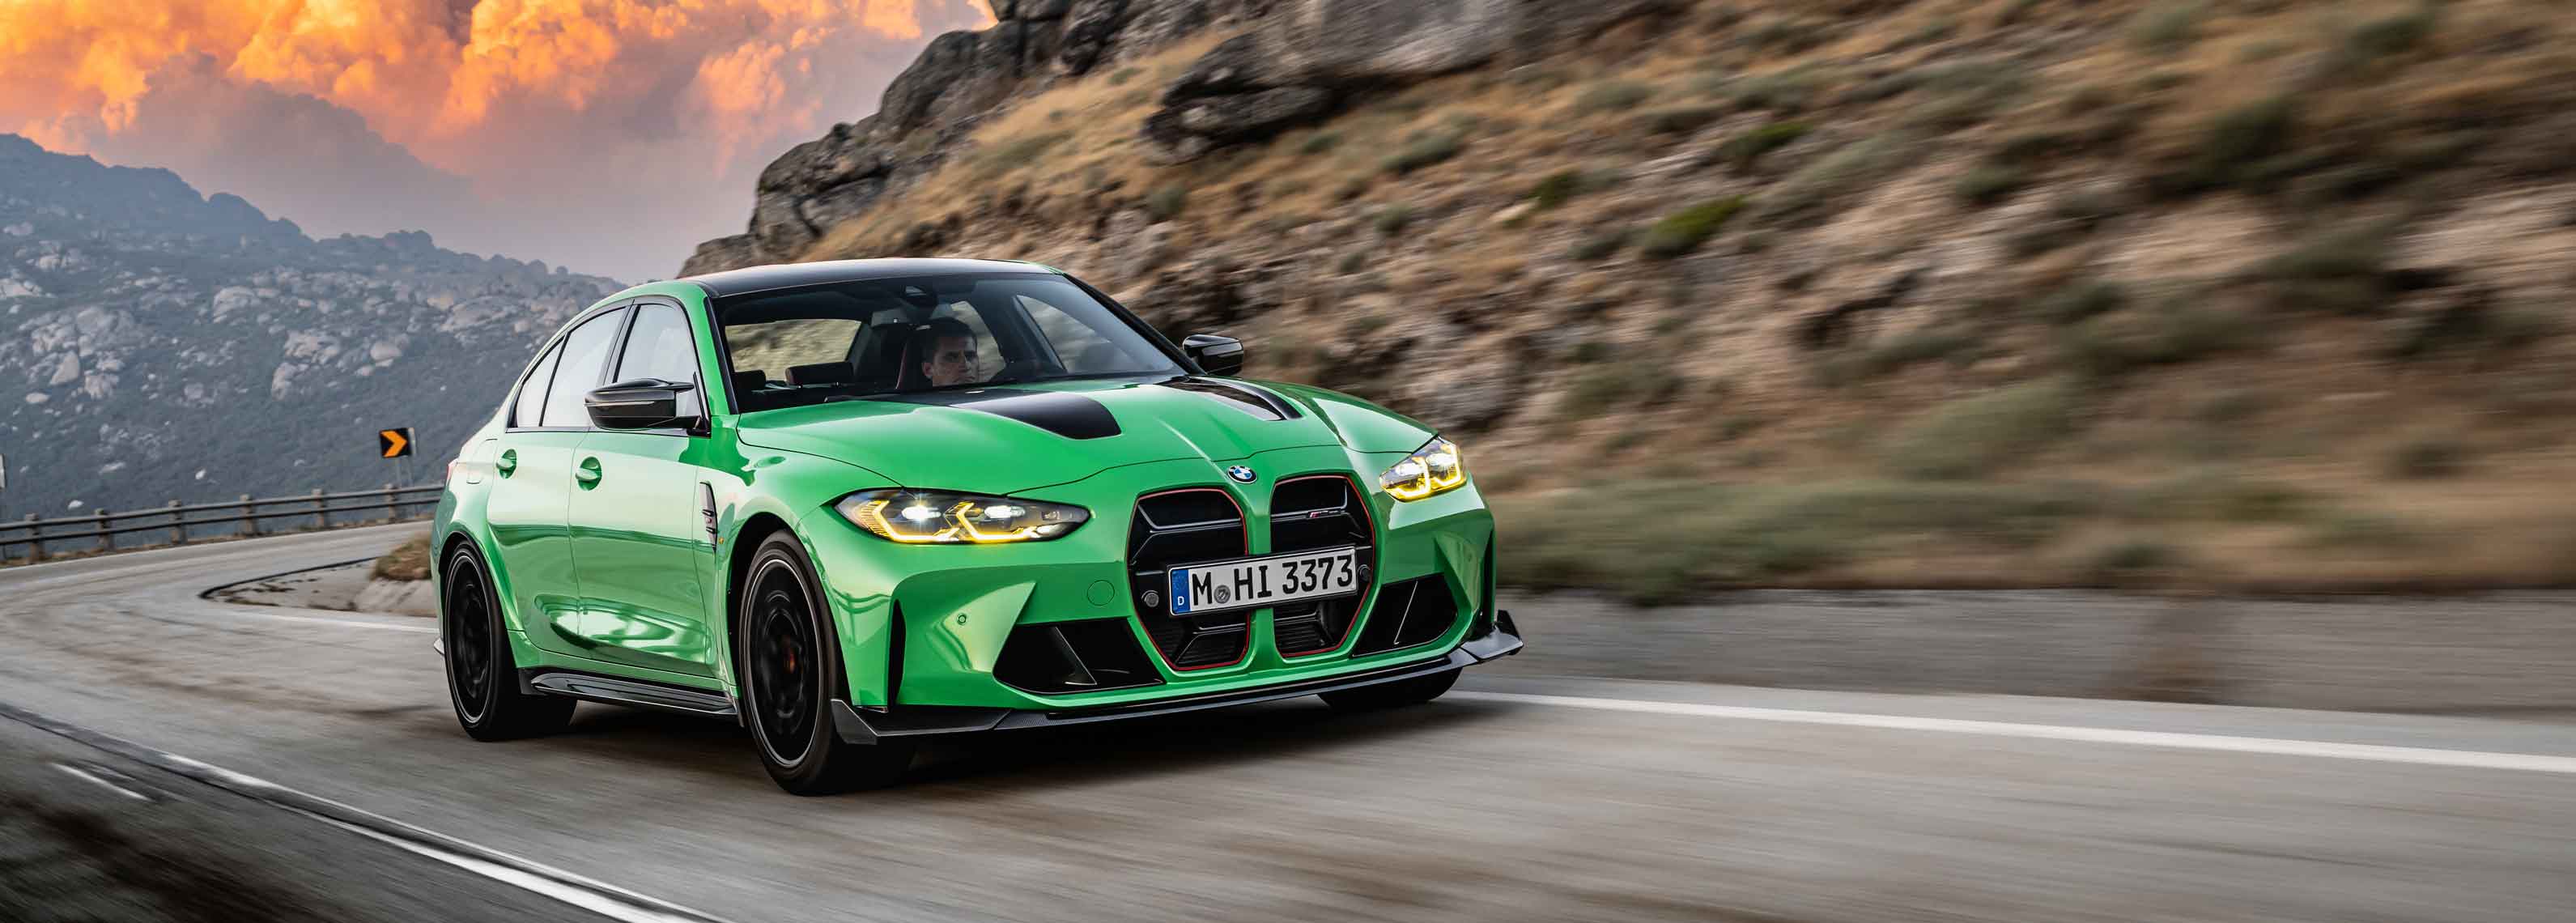 Is the BMW M3 better than the 3 series? video-banner